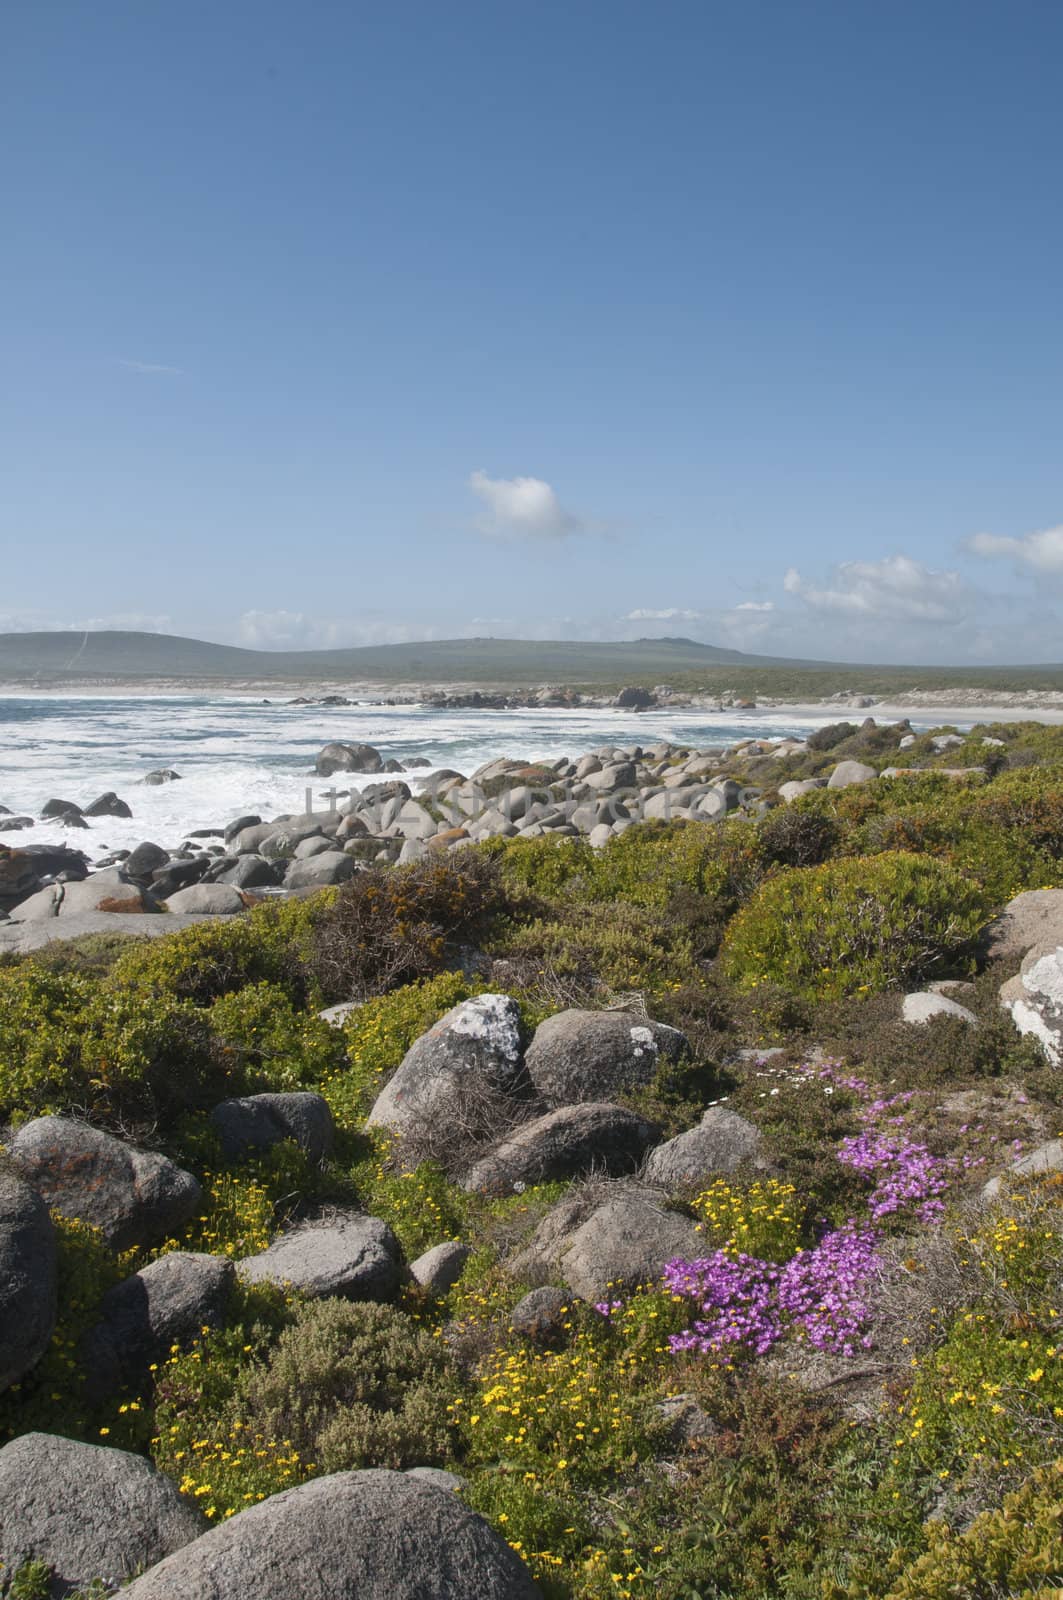 The view of purple and yellow flowers growing between the rocks, Western Cape, South Africa